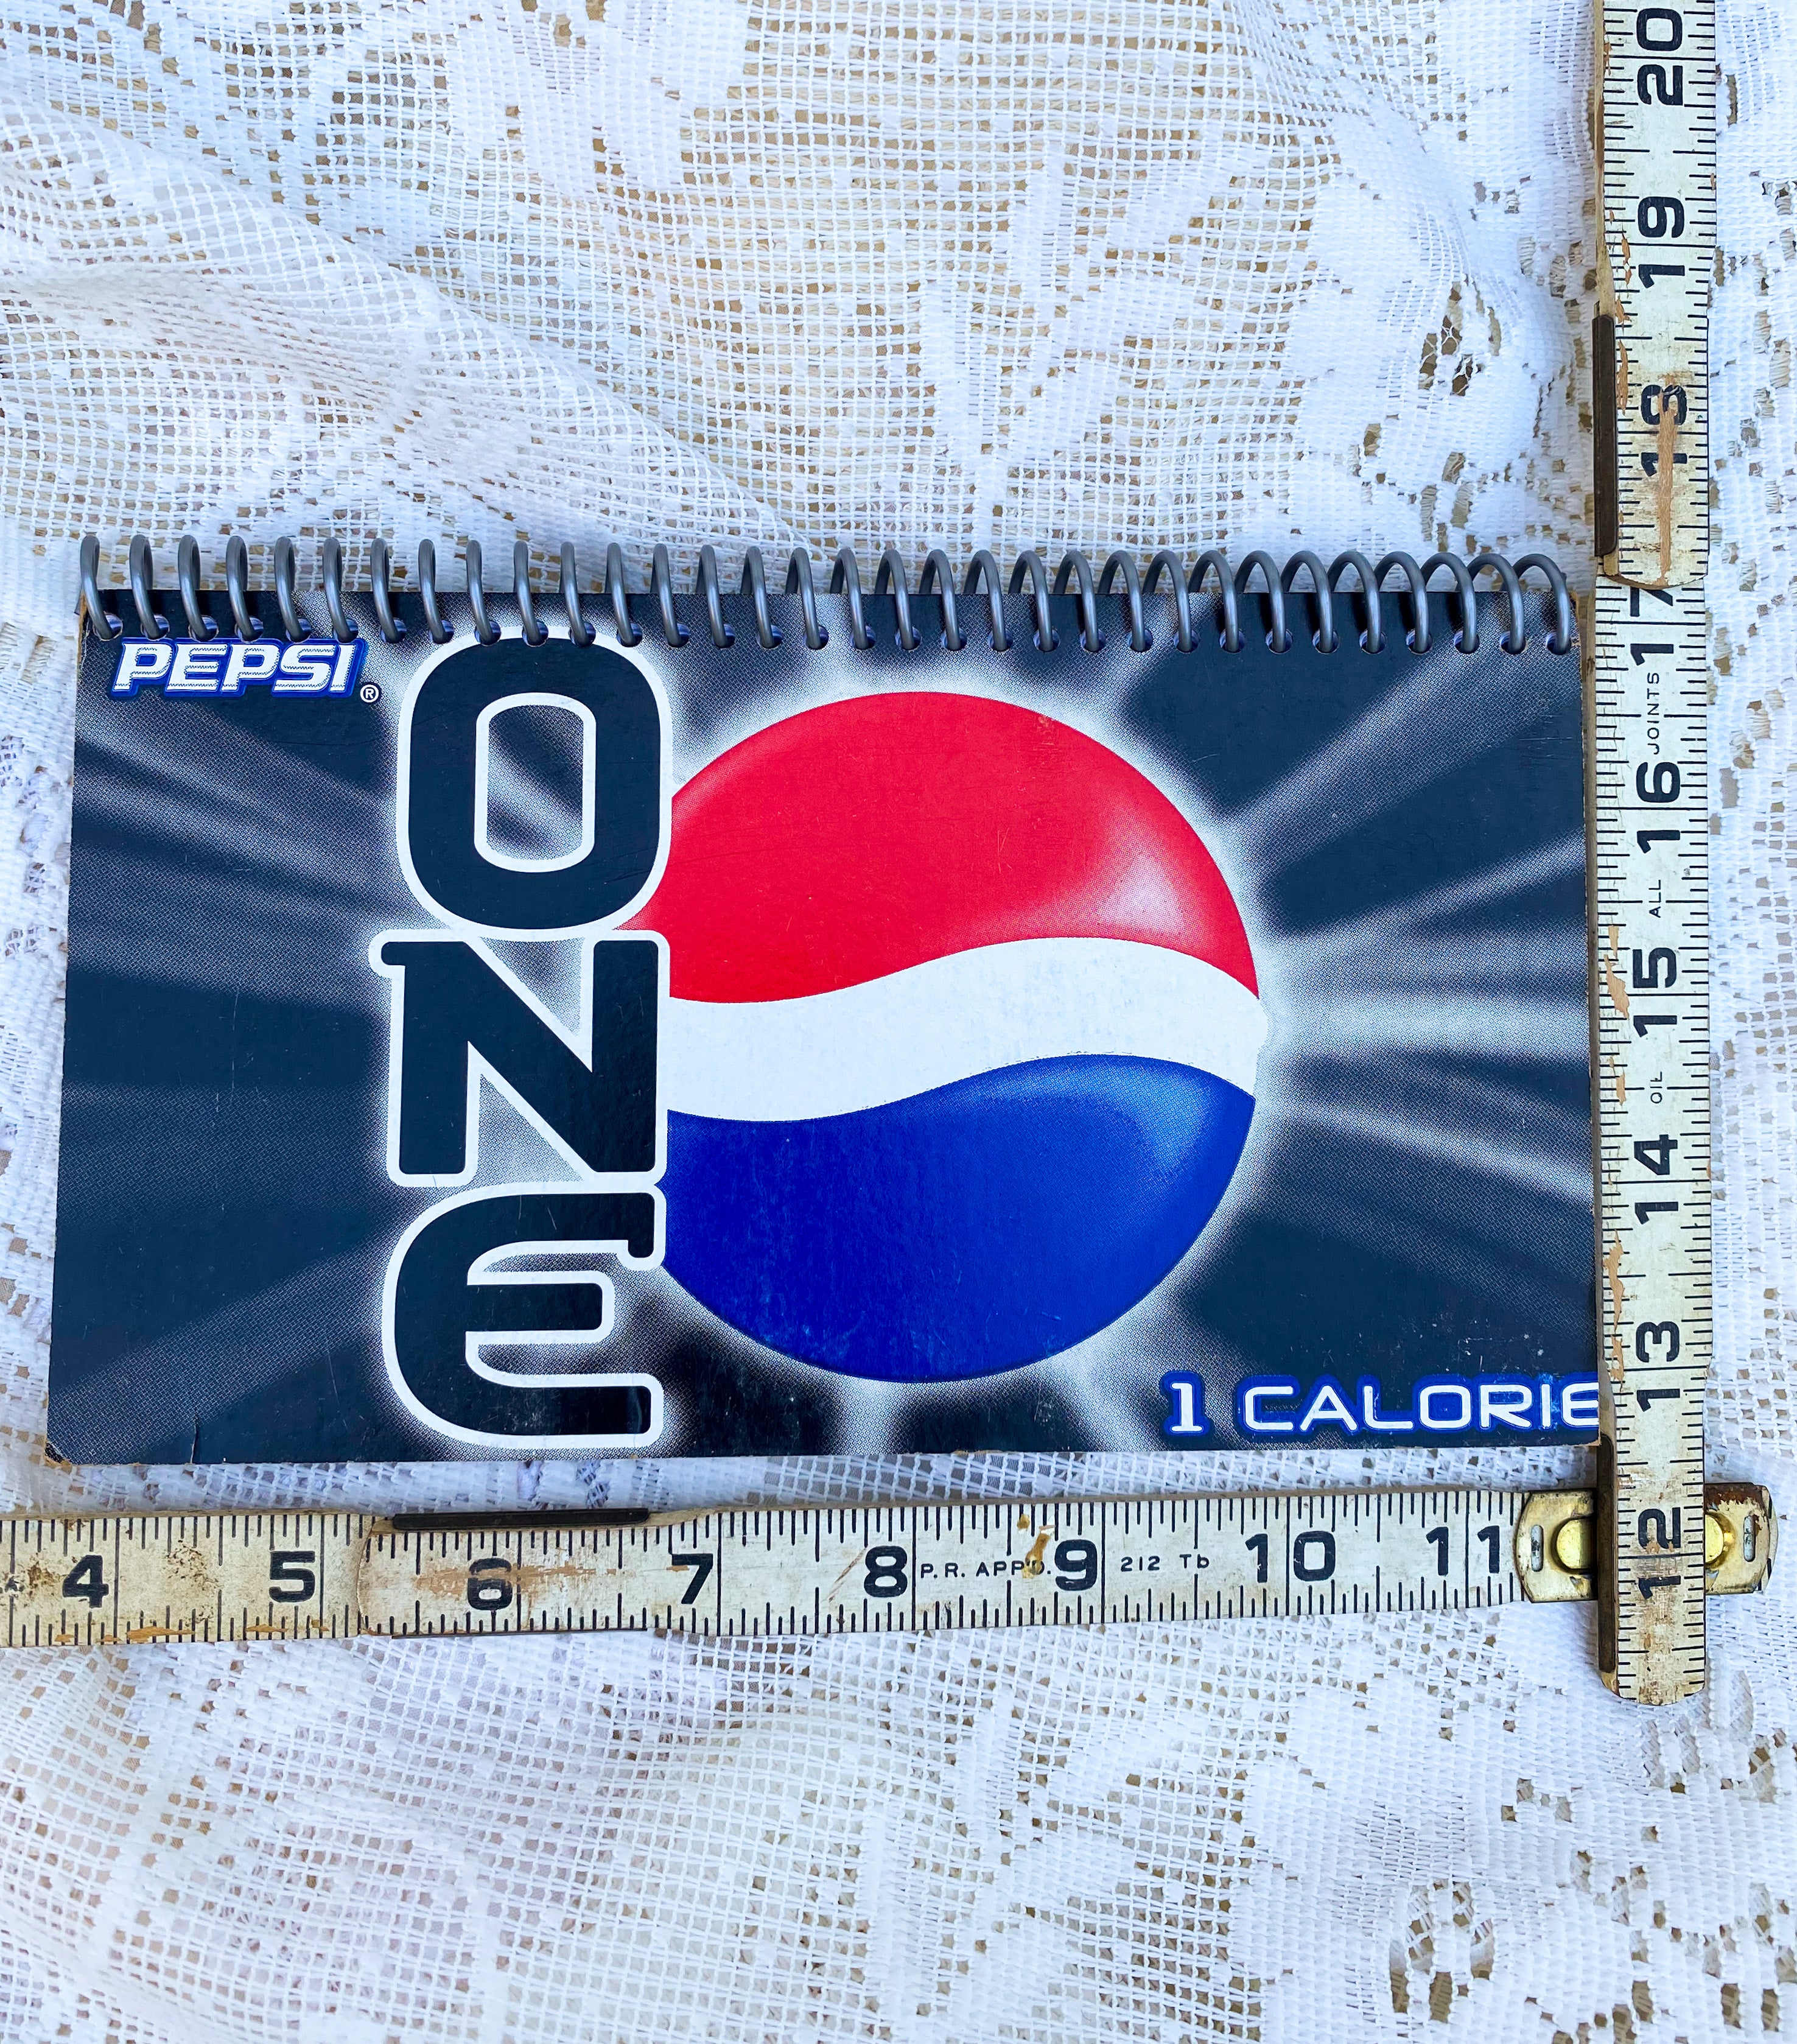 Pepsi One Upcycled Spiral Notebook